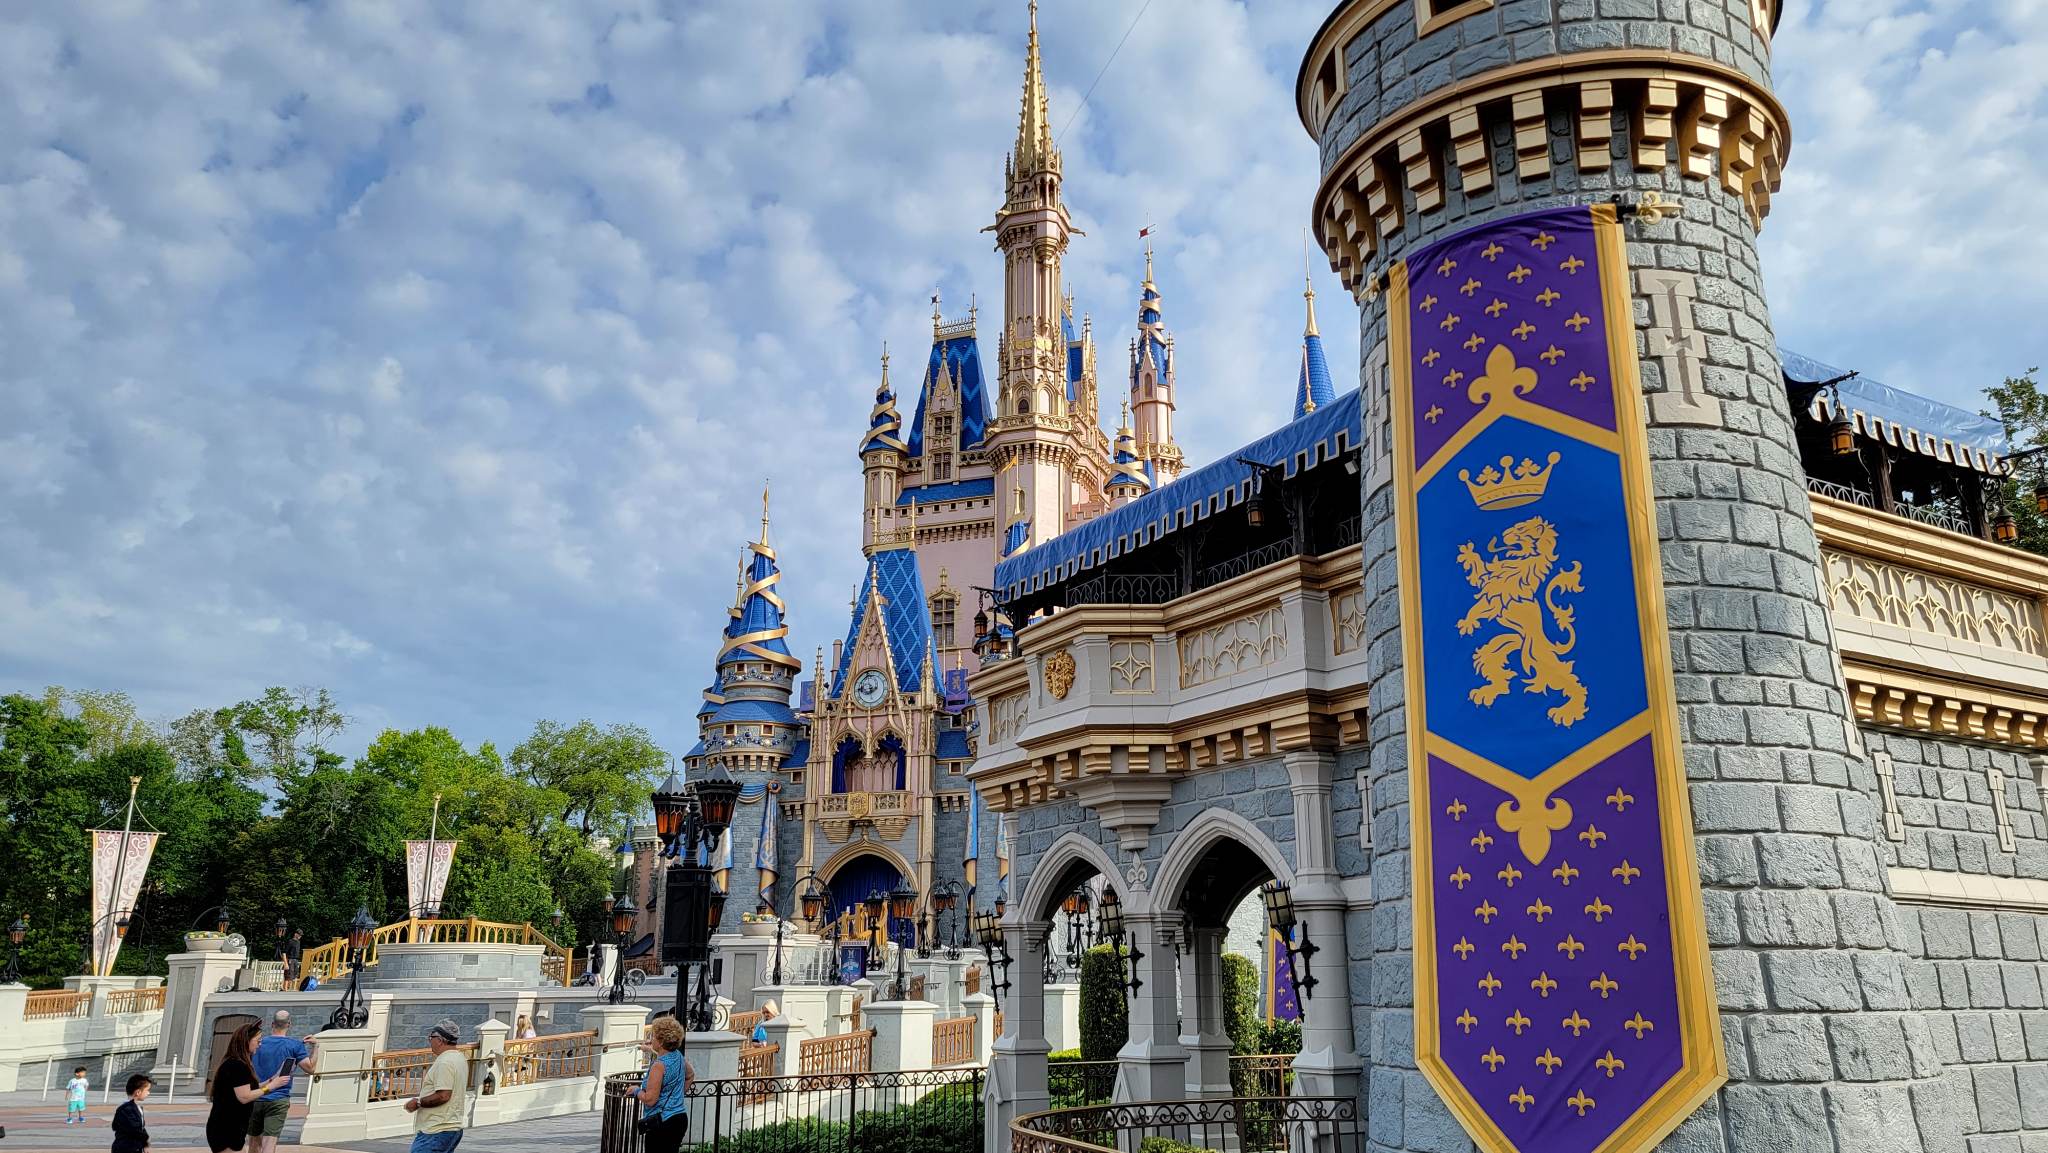 Disney Refreshes the Banners at Cinderella Castle in the Magic Kingdom